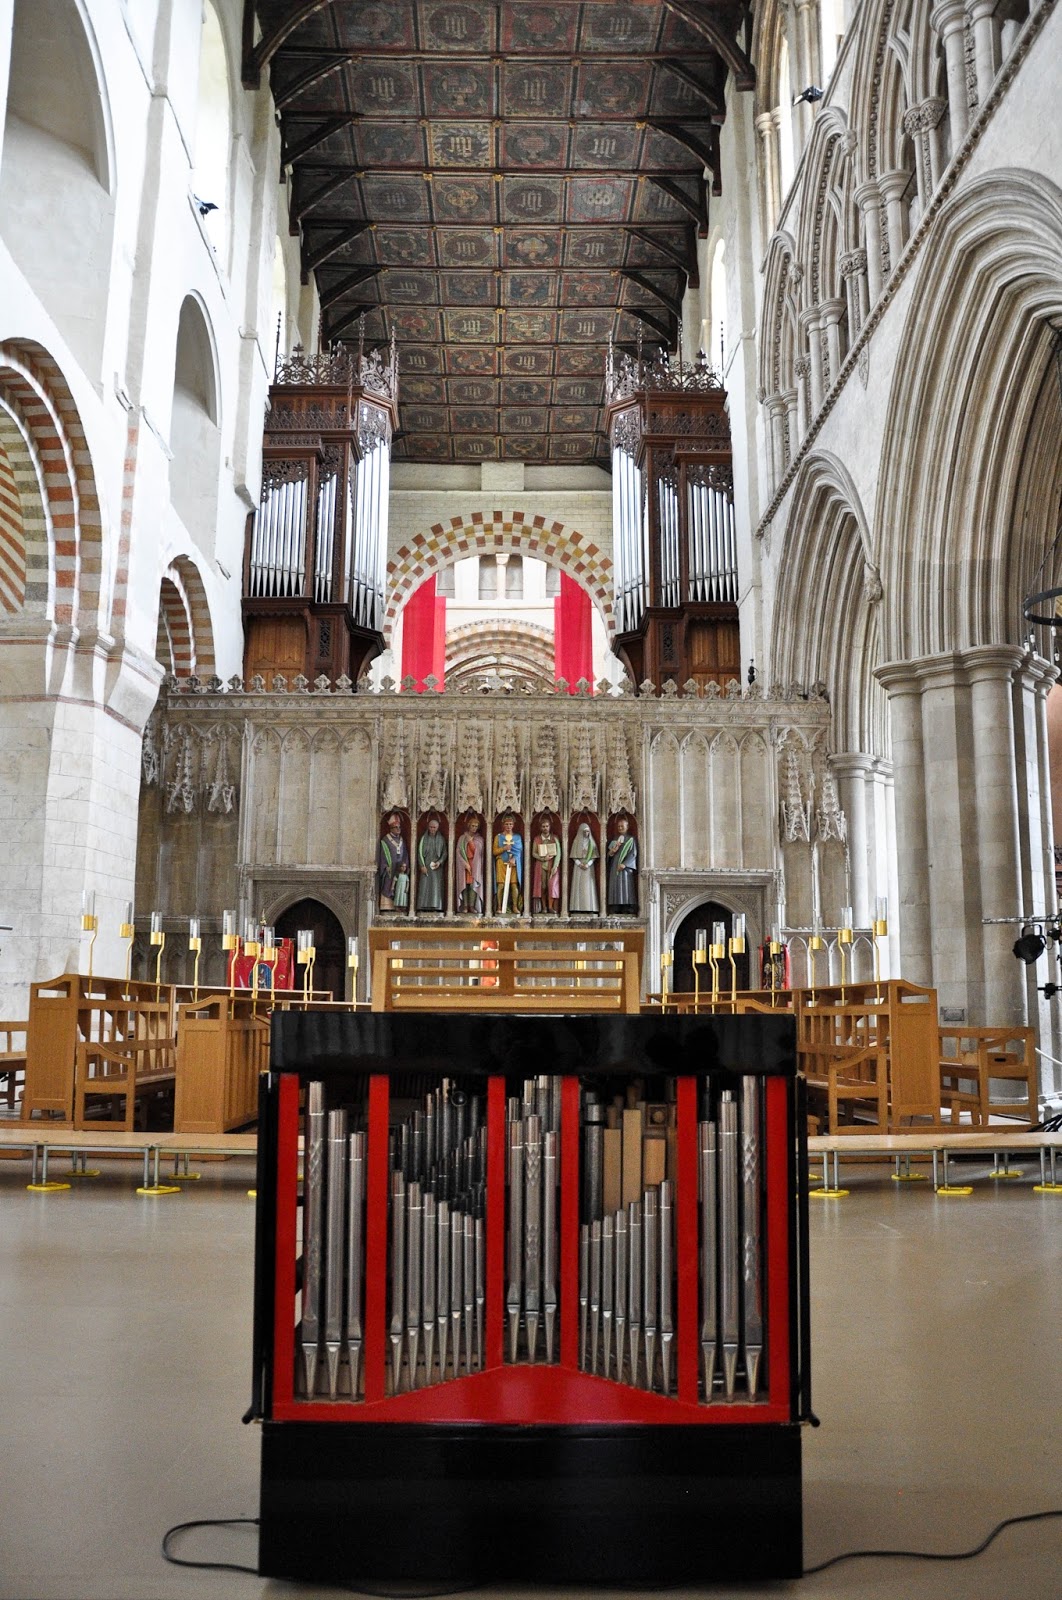 The altar, St. Albans Cathedral, St. Albans, Herts, England